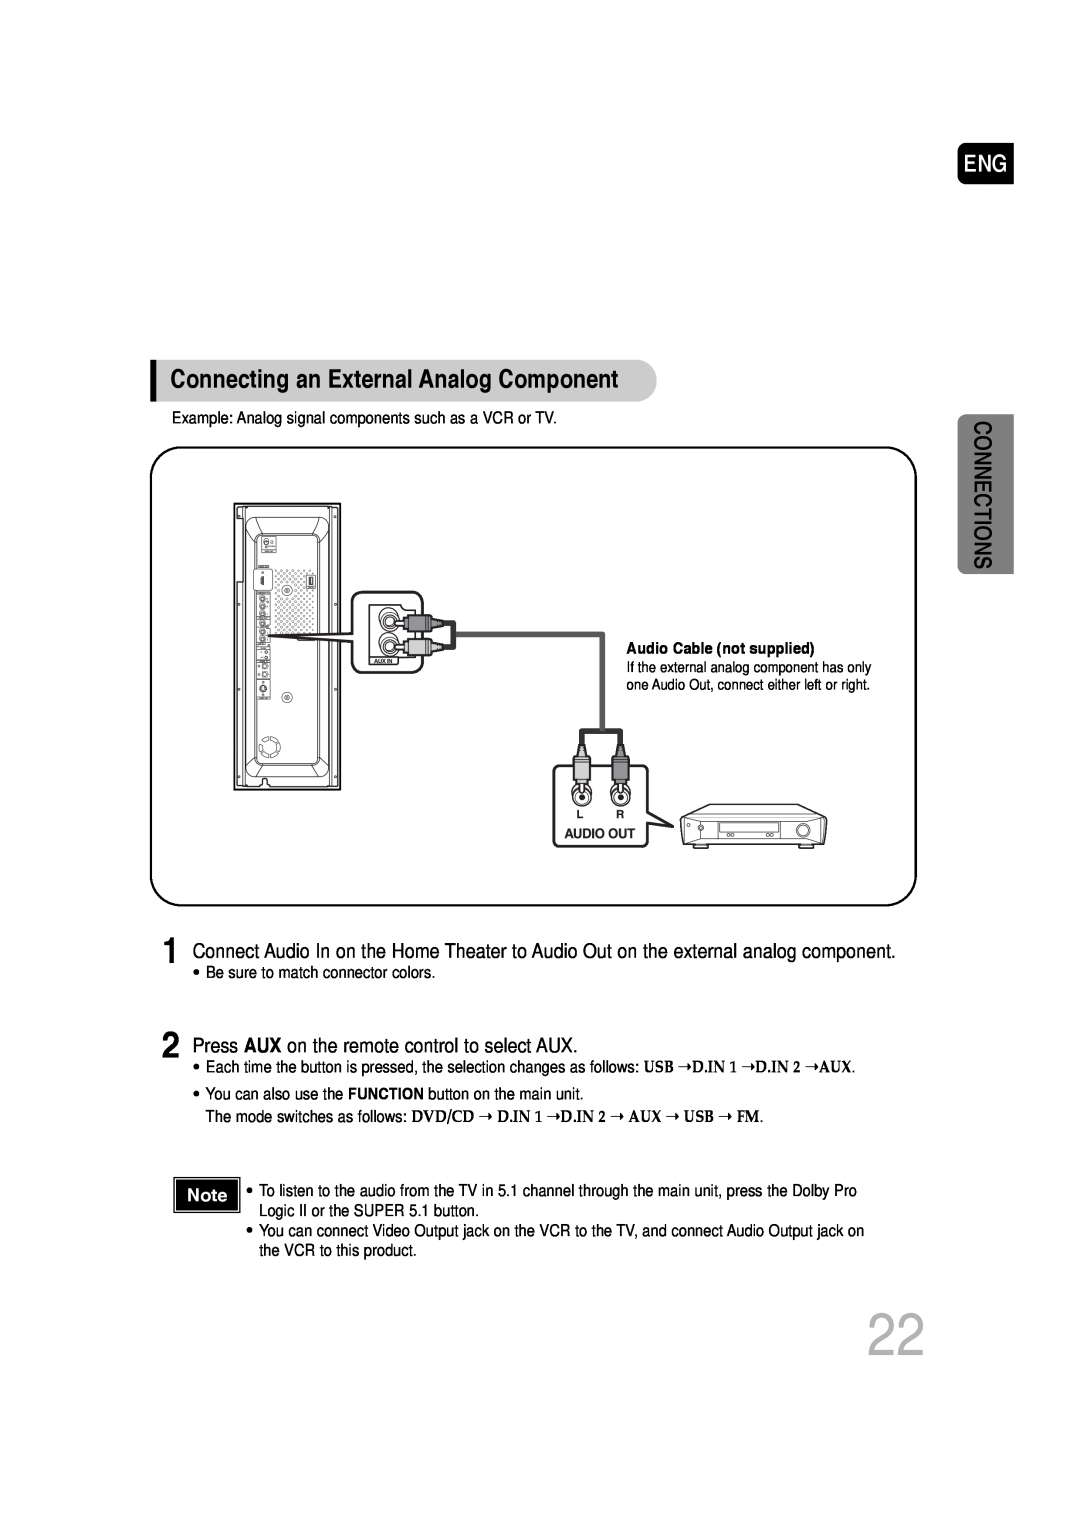 Samsung SDSM-EX manual Connecting an External Analog Component, Connections, Press AUX on the remote control to select AUX 